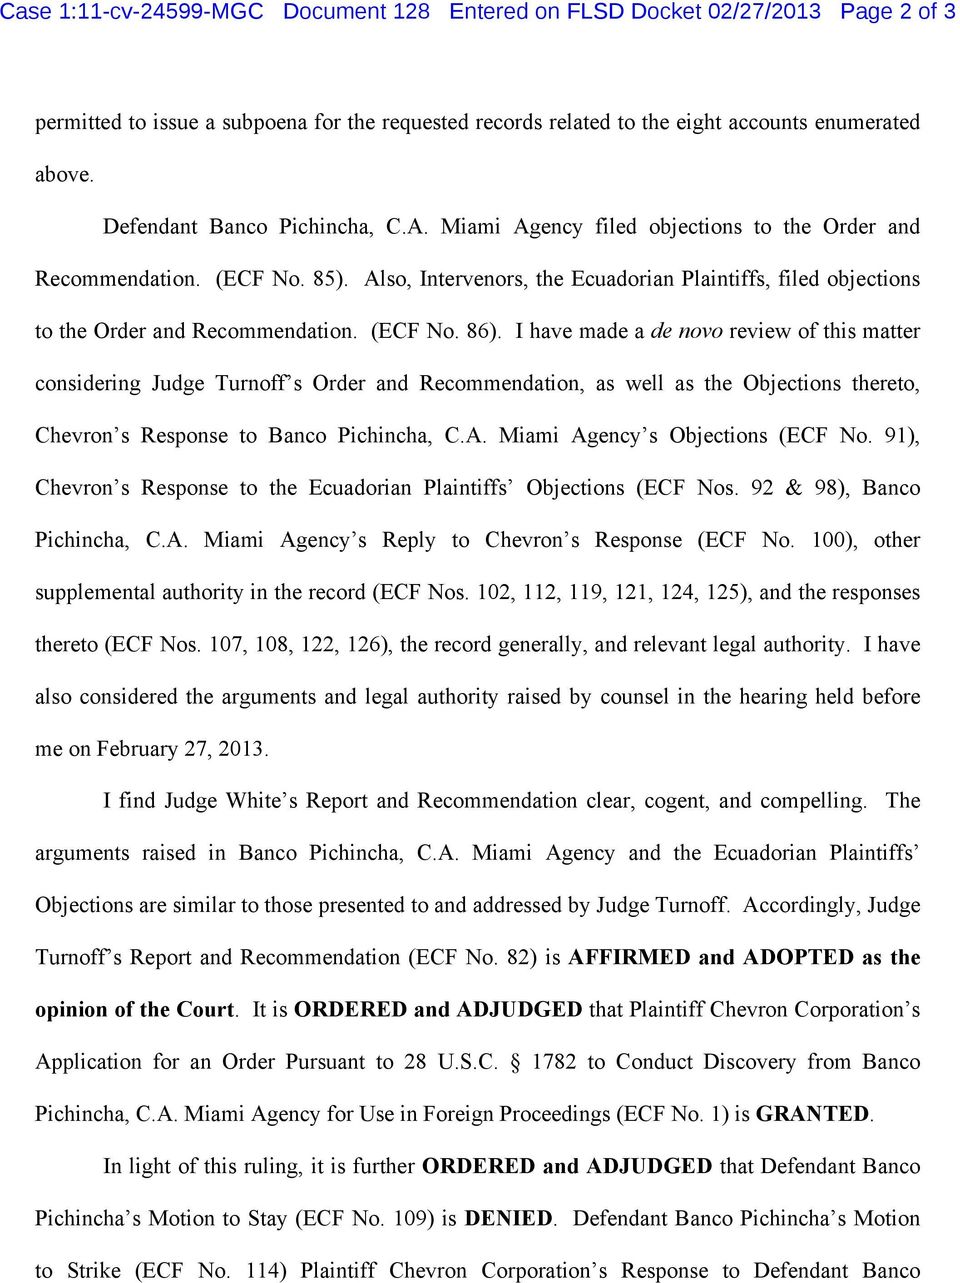 Also, Intervenors, the Ecuadorian Plaintiffs, filed objections to the Order and Recommendation. (ECF No. 86).